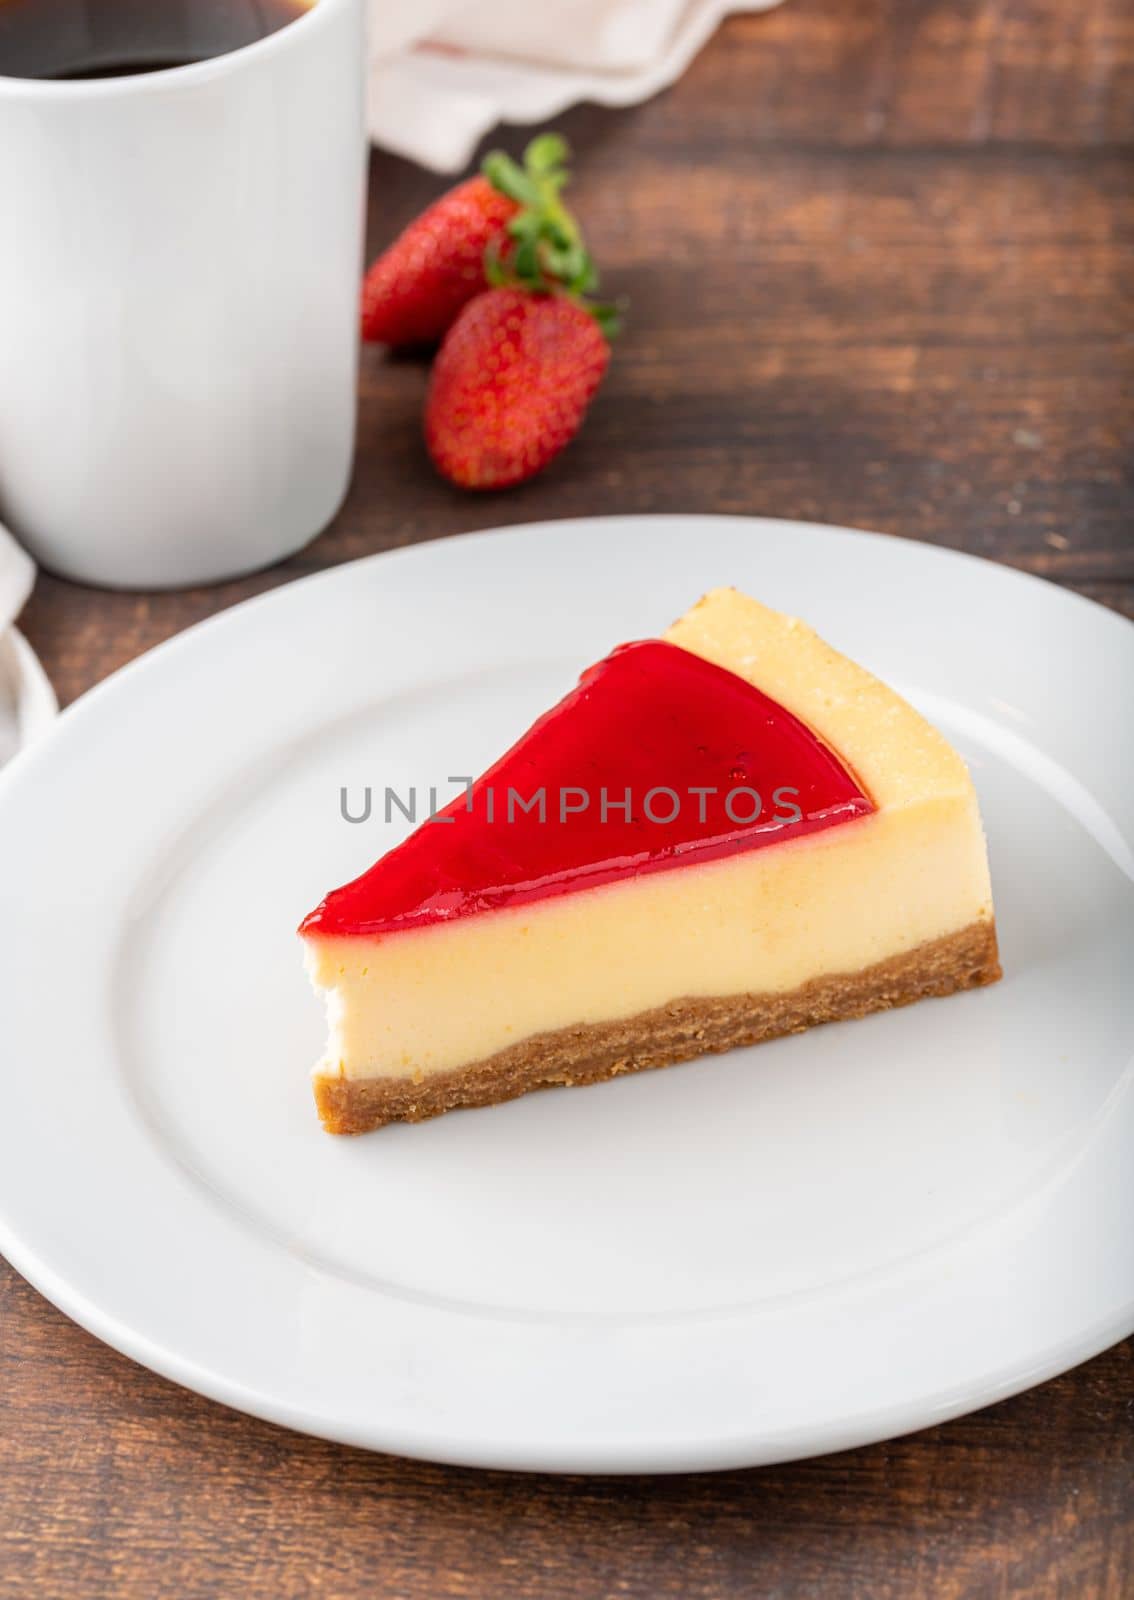 Delicious strawberry cheesecake with coffee next to it on wooden table by Sonat